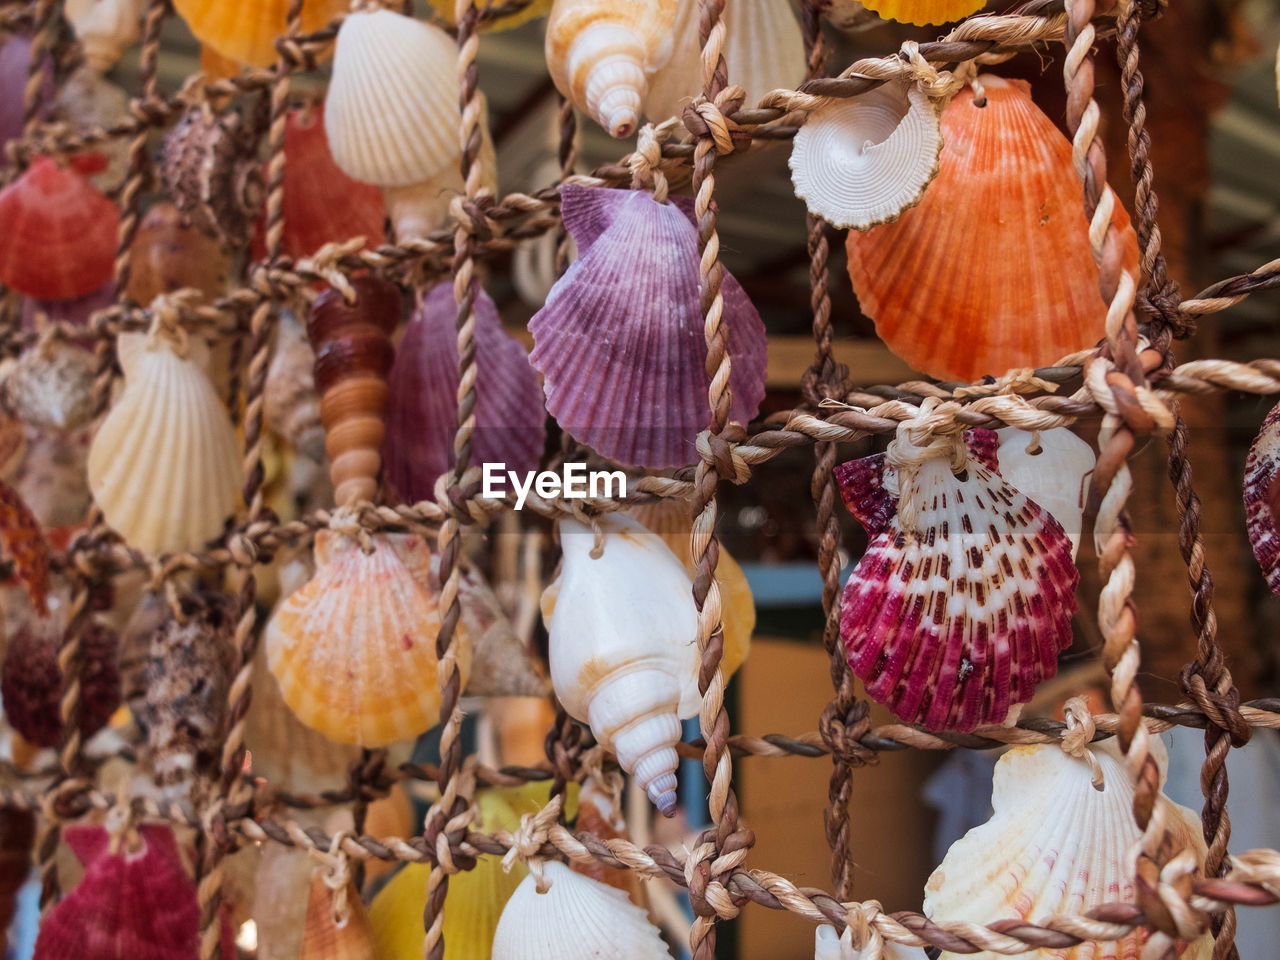 Traditional colorful home decorations made from different shape and color seashells.